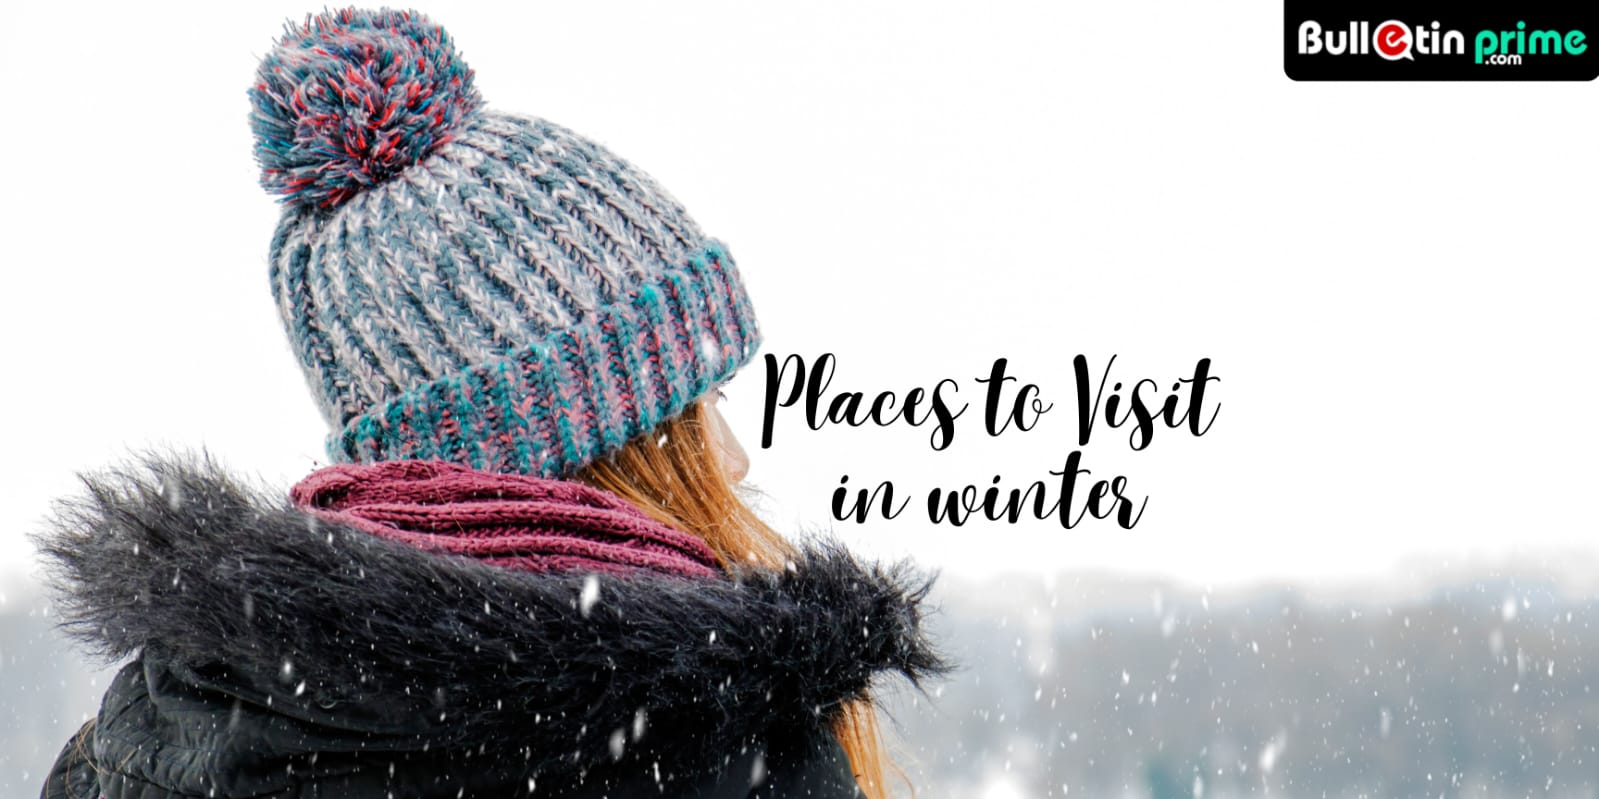 Best Places to Visit in winter